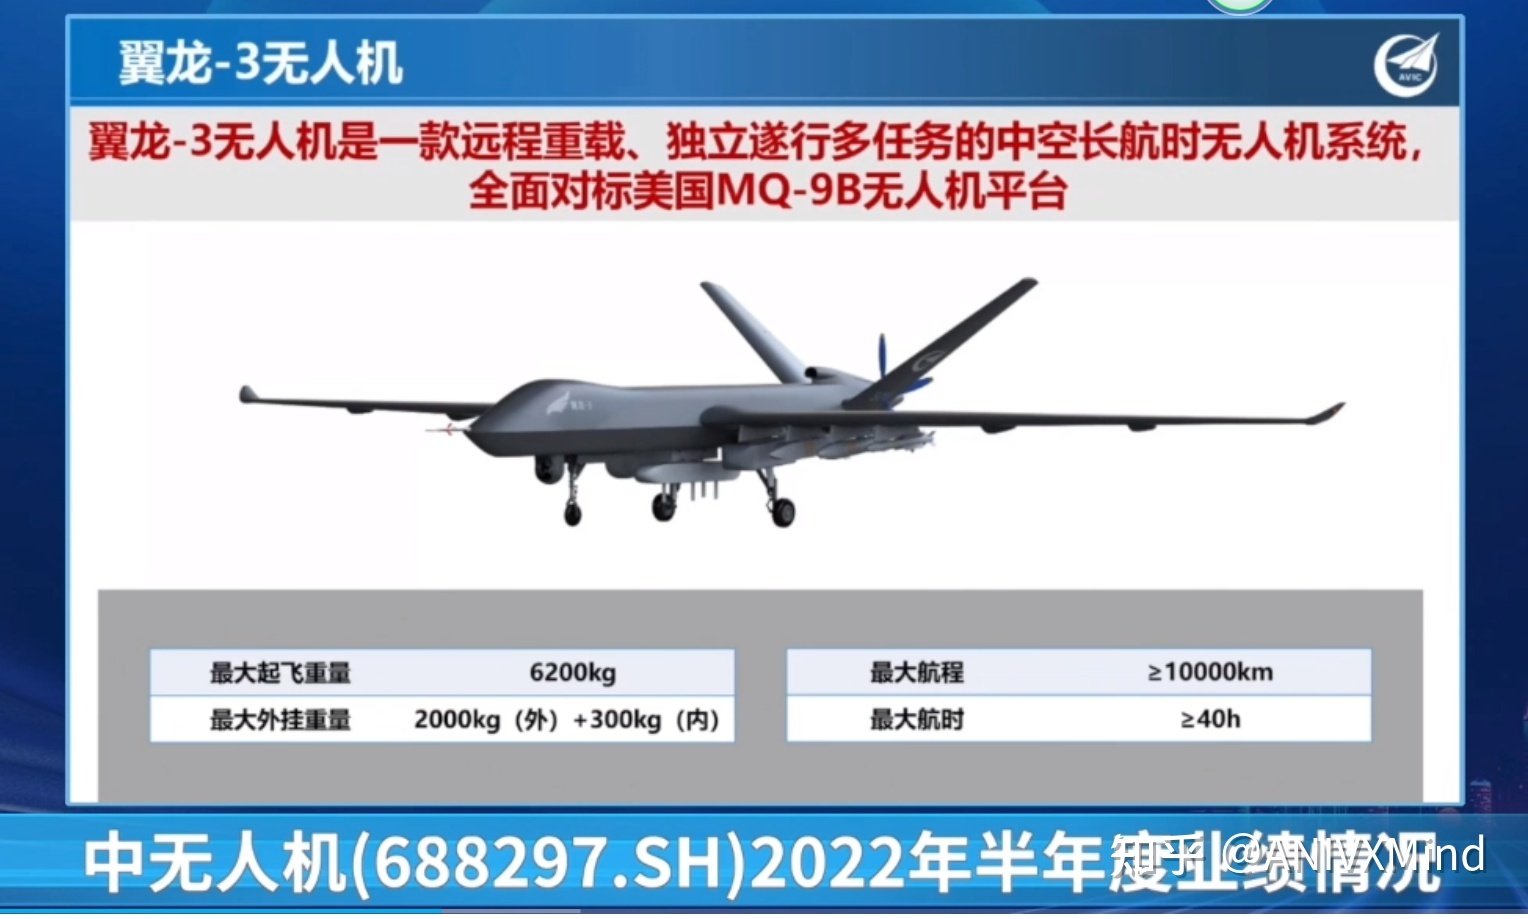 China unveiled the Wing Loong 3 reconnaissance drone, a competitor to the MQ-9B SkyGuardian, with a range of 10,000 km and PL-10 missiles-2